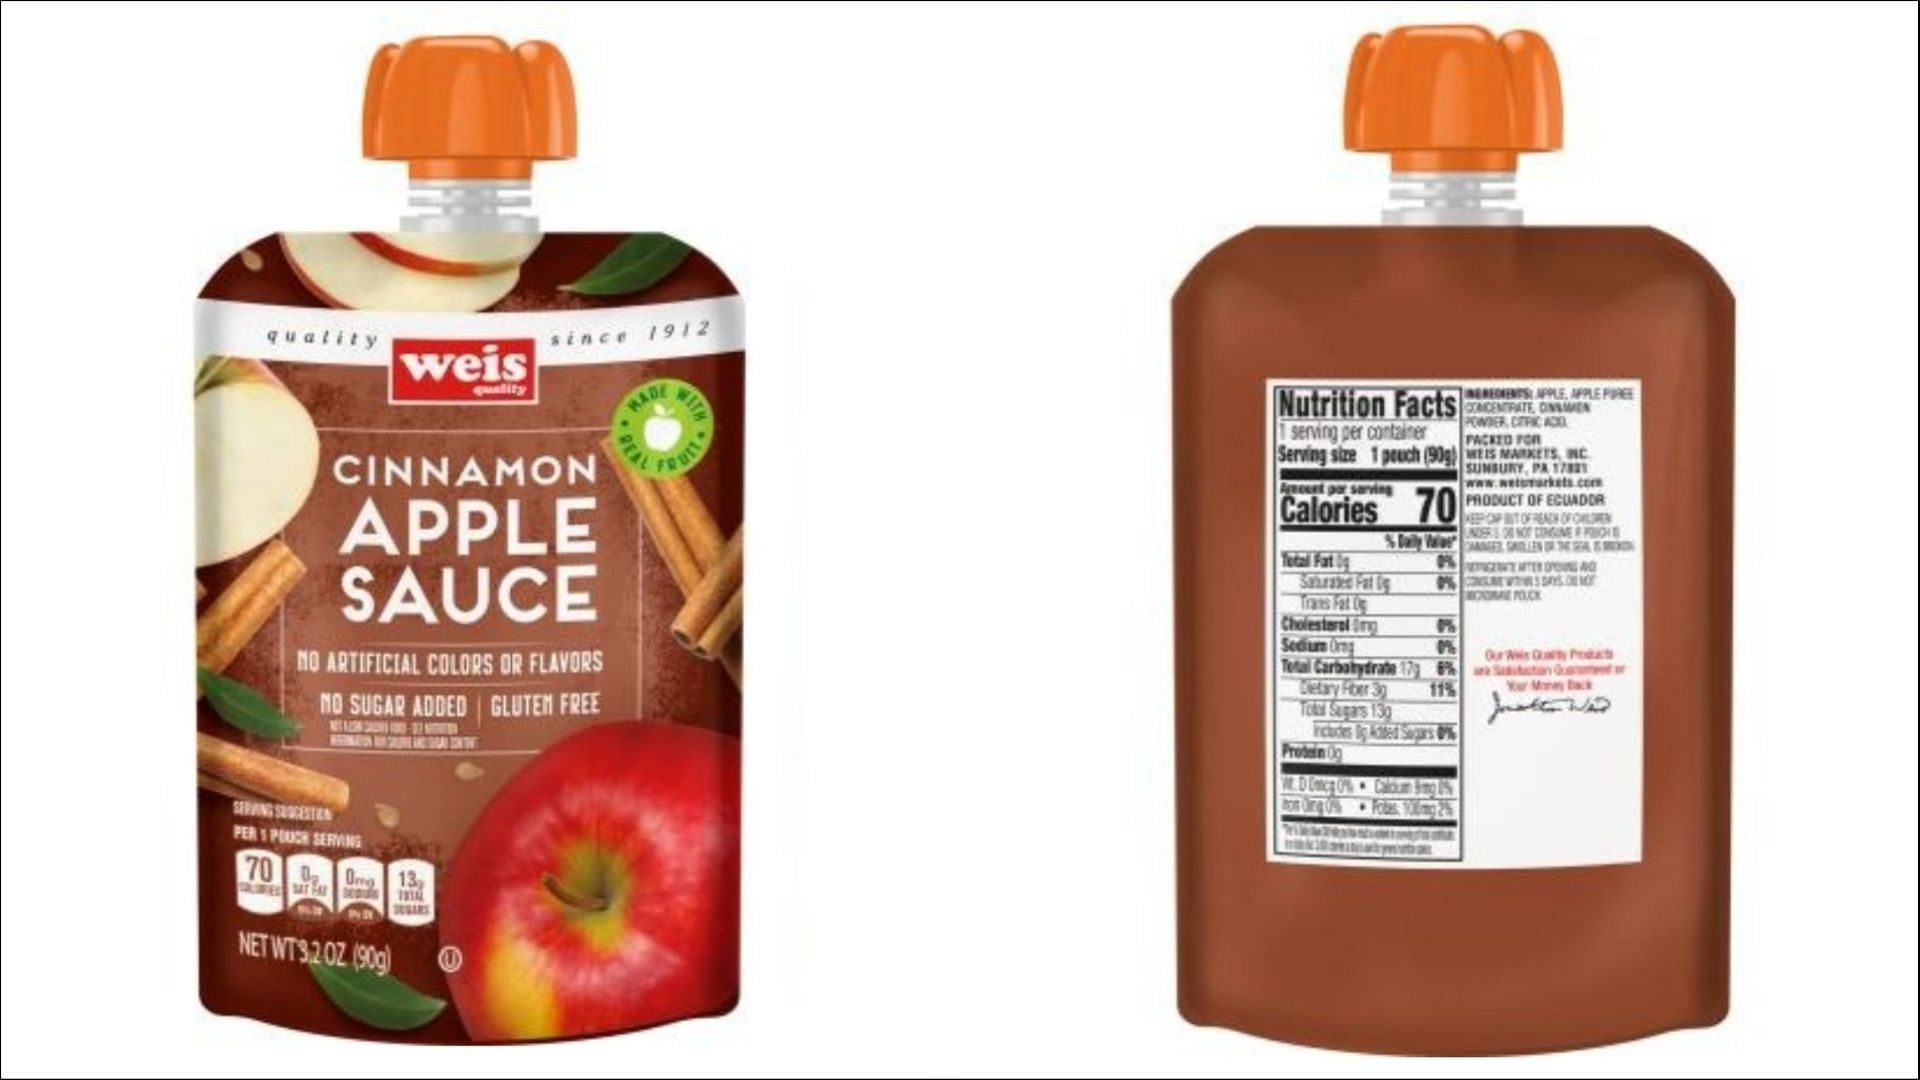 The recalled applesauce products may contain elevated levels of lead and may cause lead toxicity (Image via FDA)